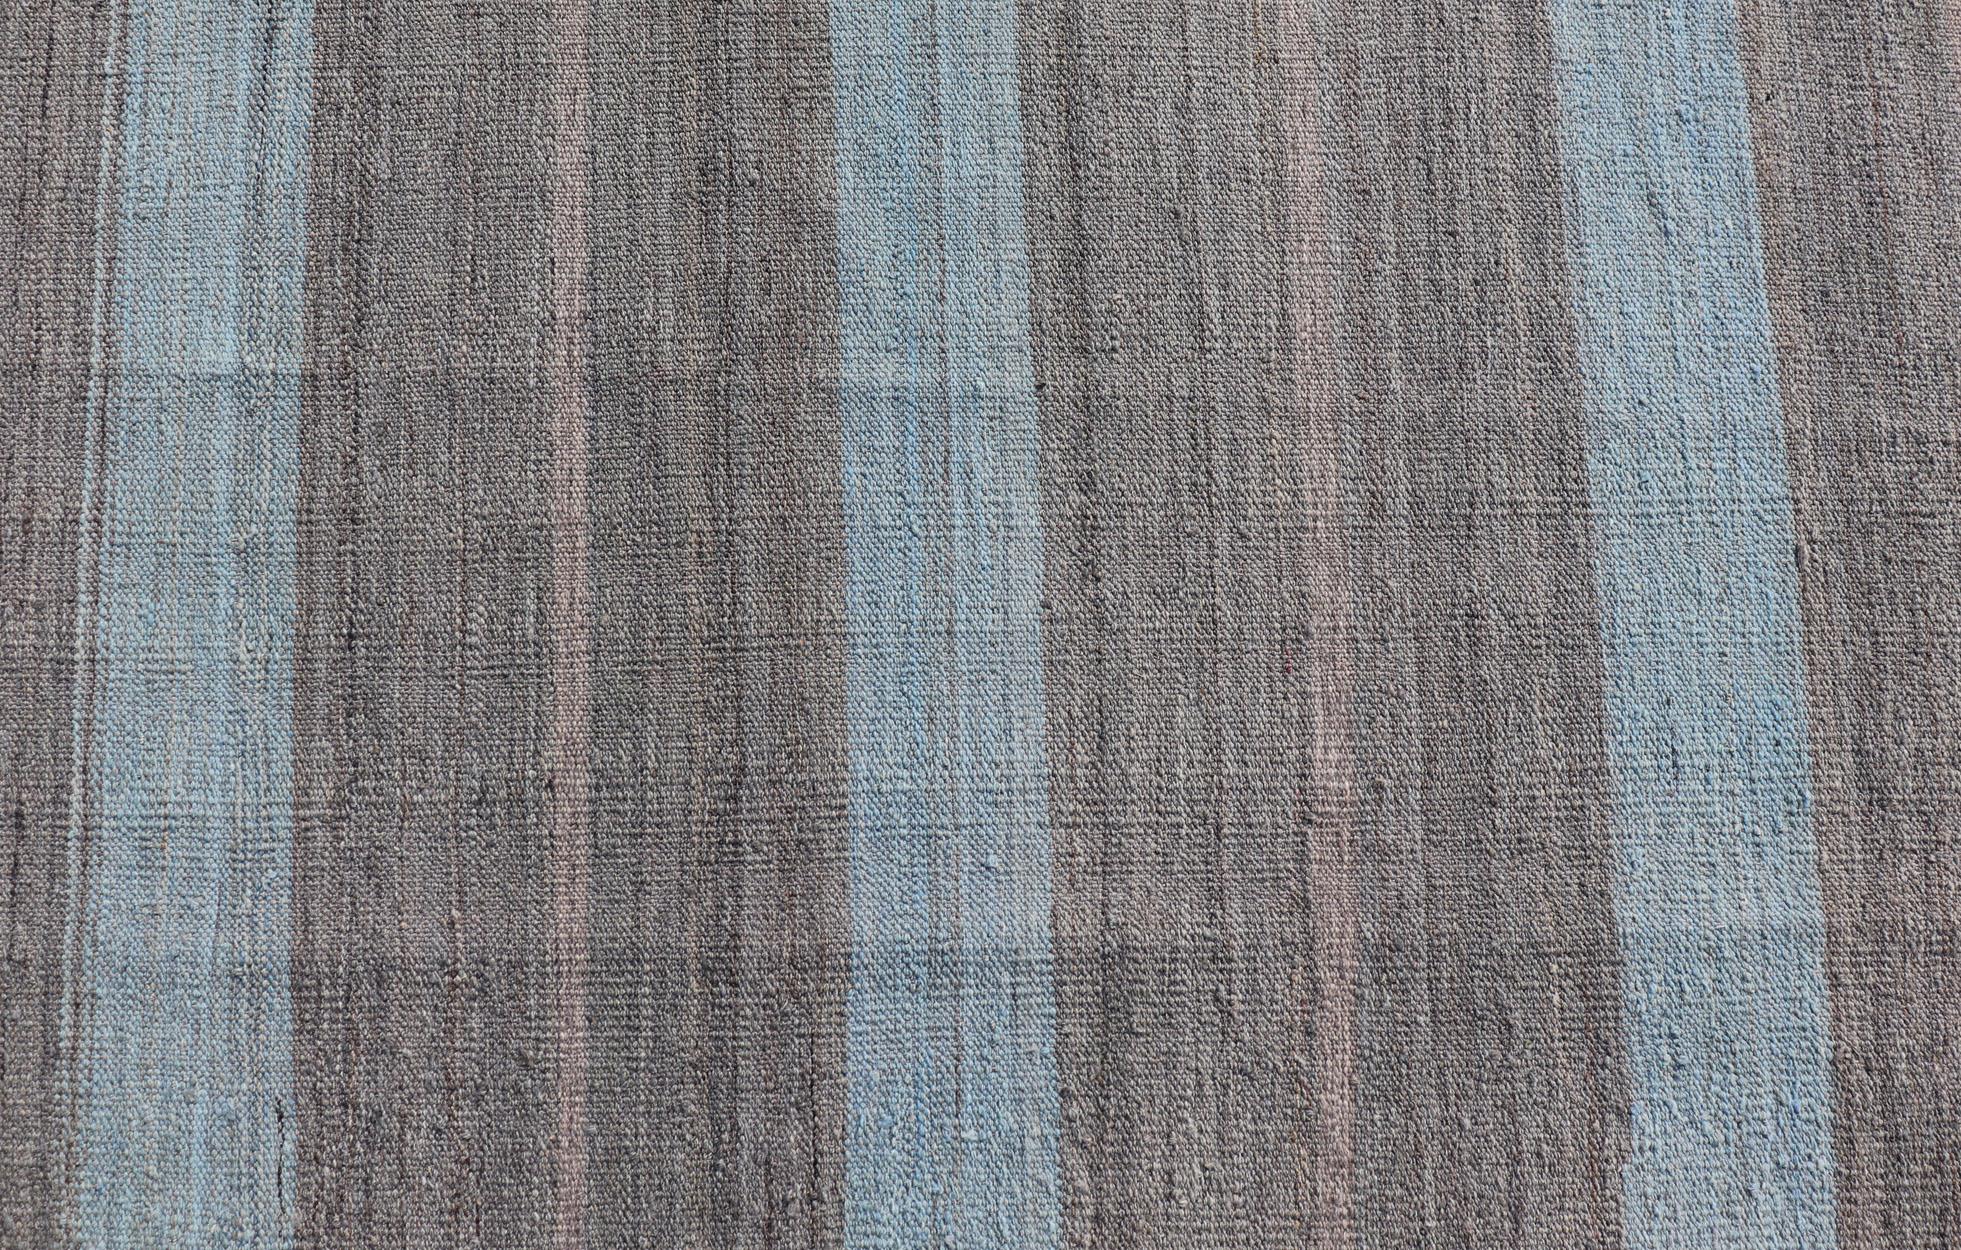 Modern Kilim Casual Rug with Stripes in Shades of Blue, Gray' and Charcoal 2